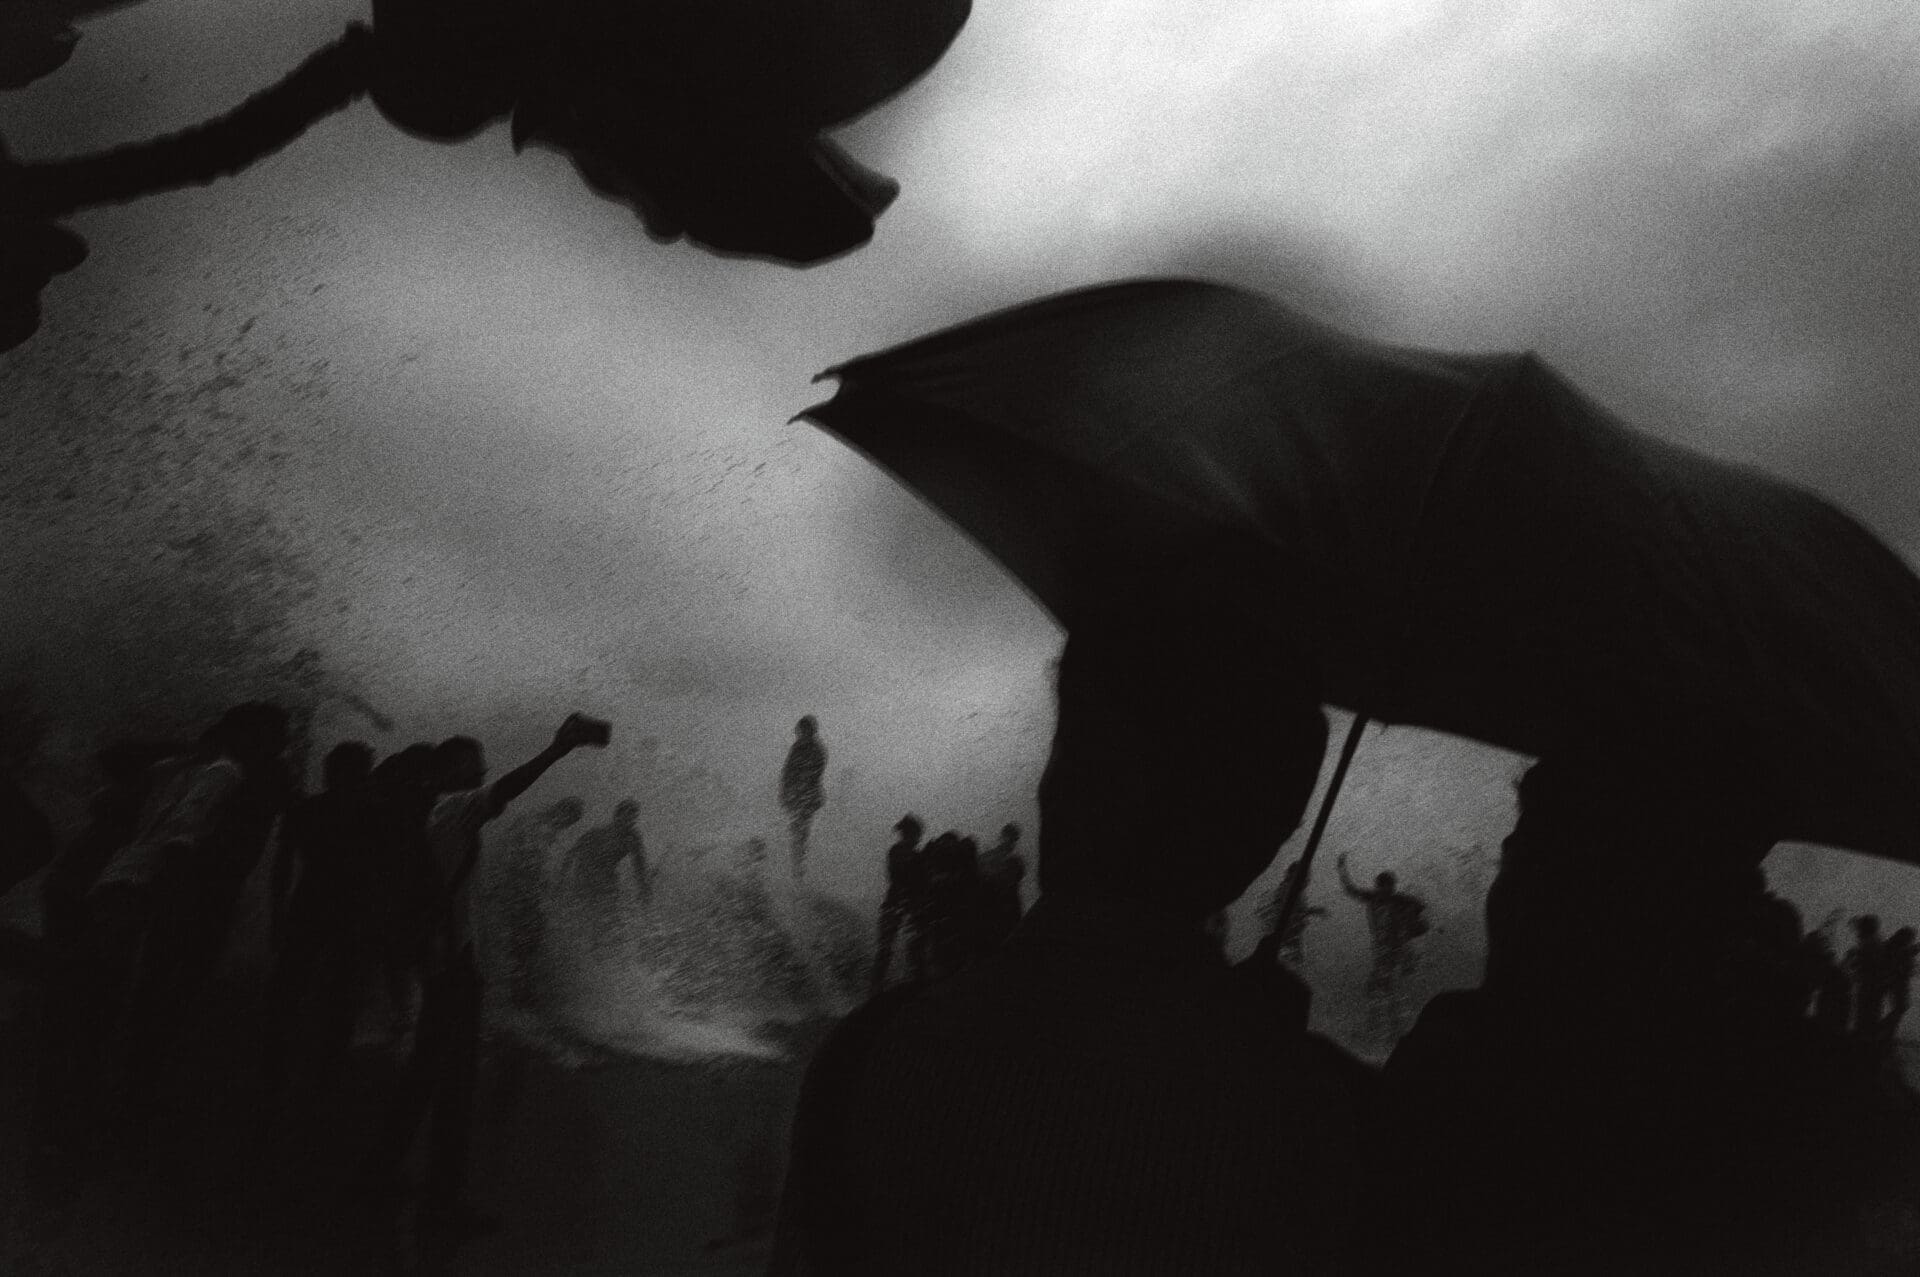 Photographer Sunhil Sippy on Mumbai | a more close-up view of a person holding an umbrella against a stormy sky